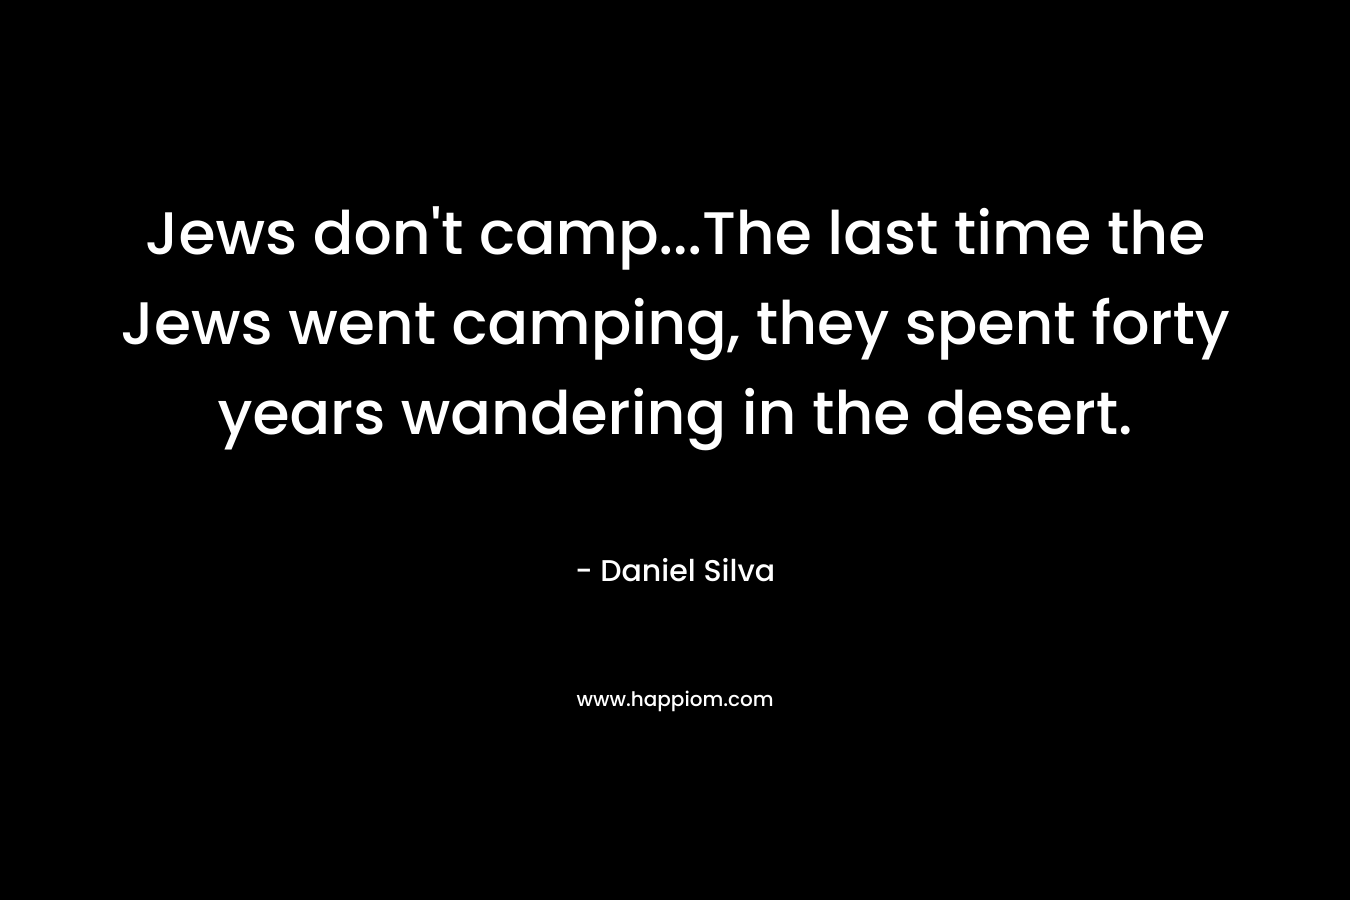 Jews don’t camp…The last time the Jews went camping, they spent forty years wandering in the desert. – Daniel Silva